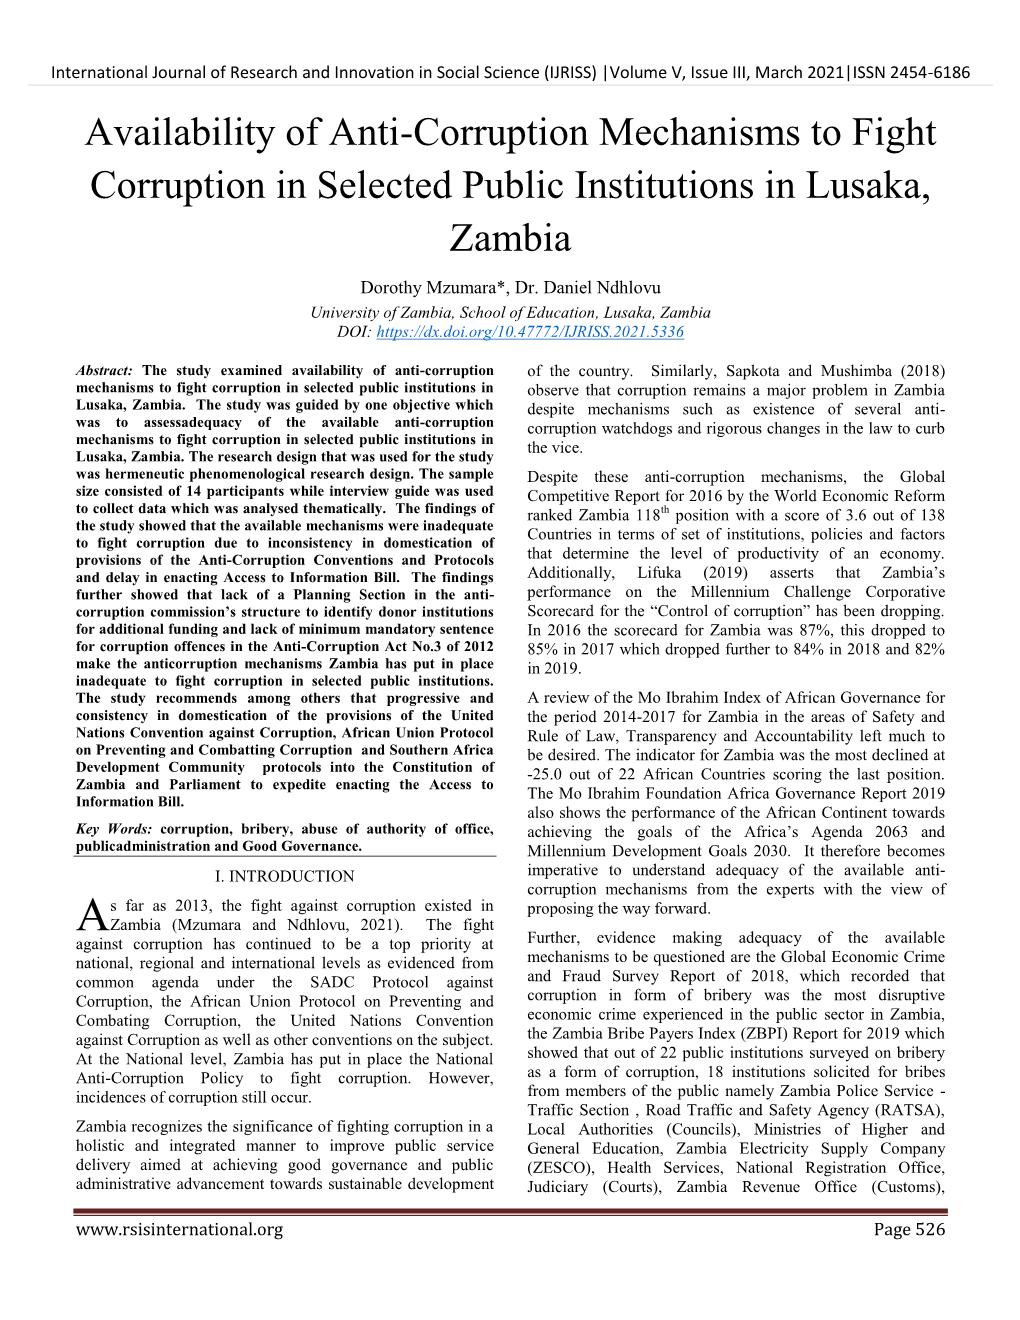 Availability of Anti-Corruption Mechanisms to Fight Corruption in Selected Public Institutions in Lusaka, Zambia Dorothy Mzumara*, Dr